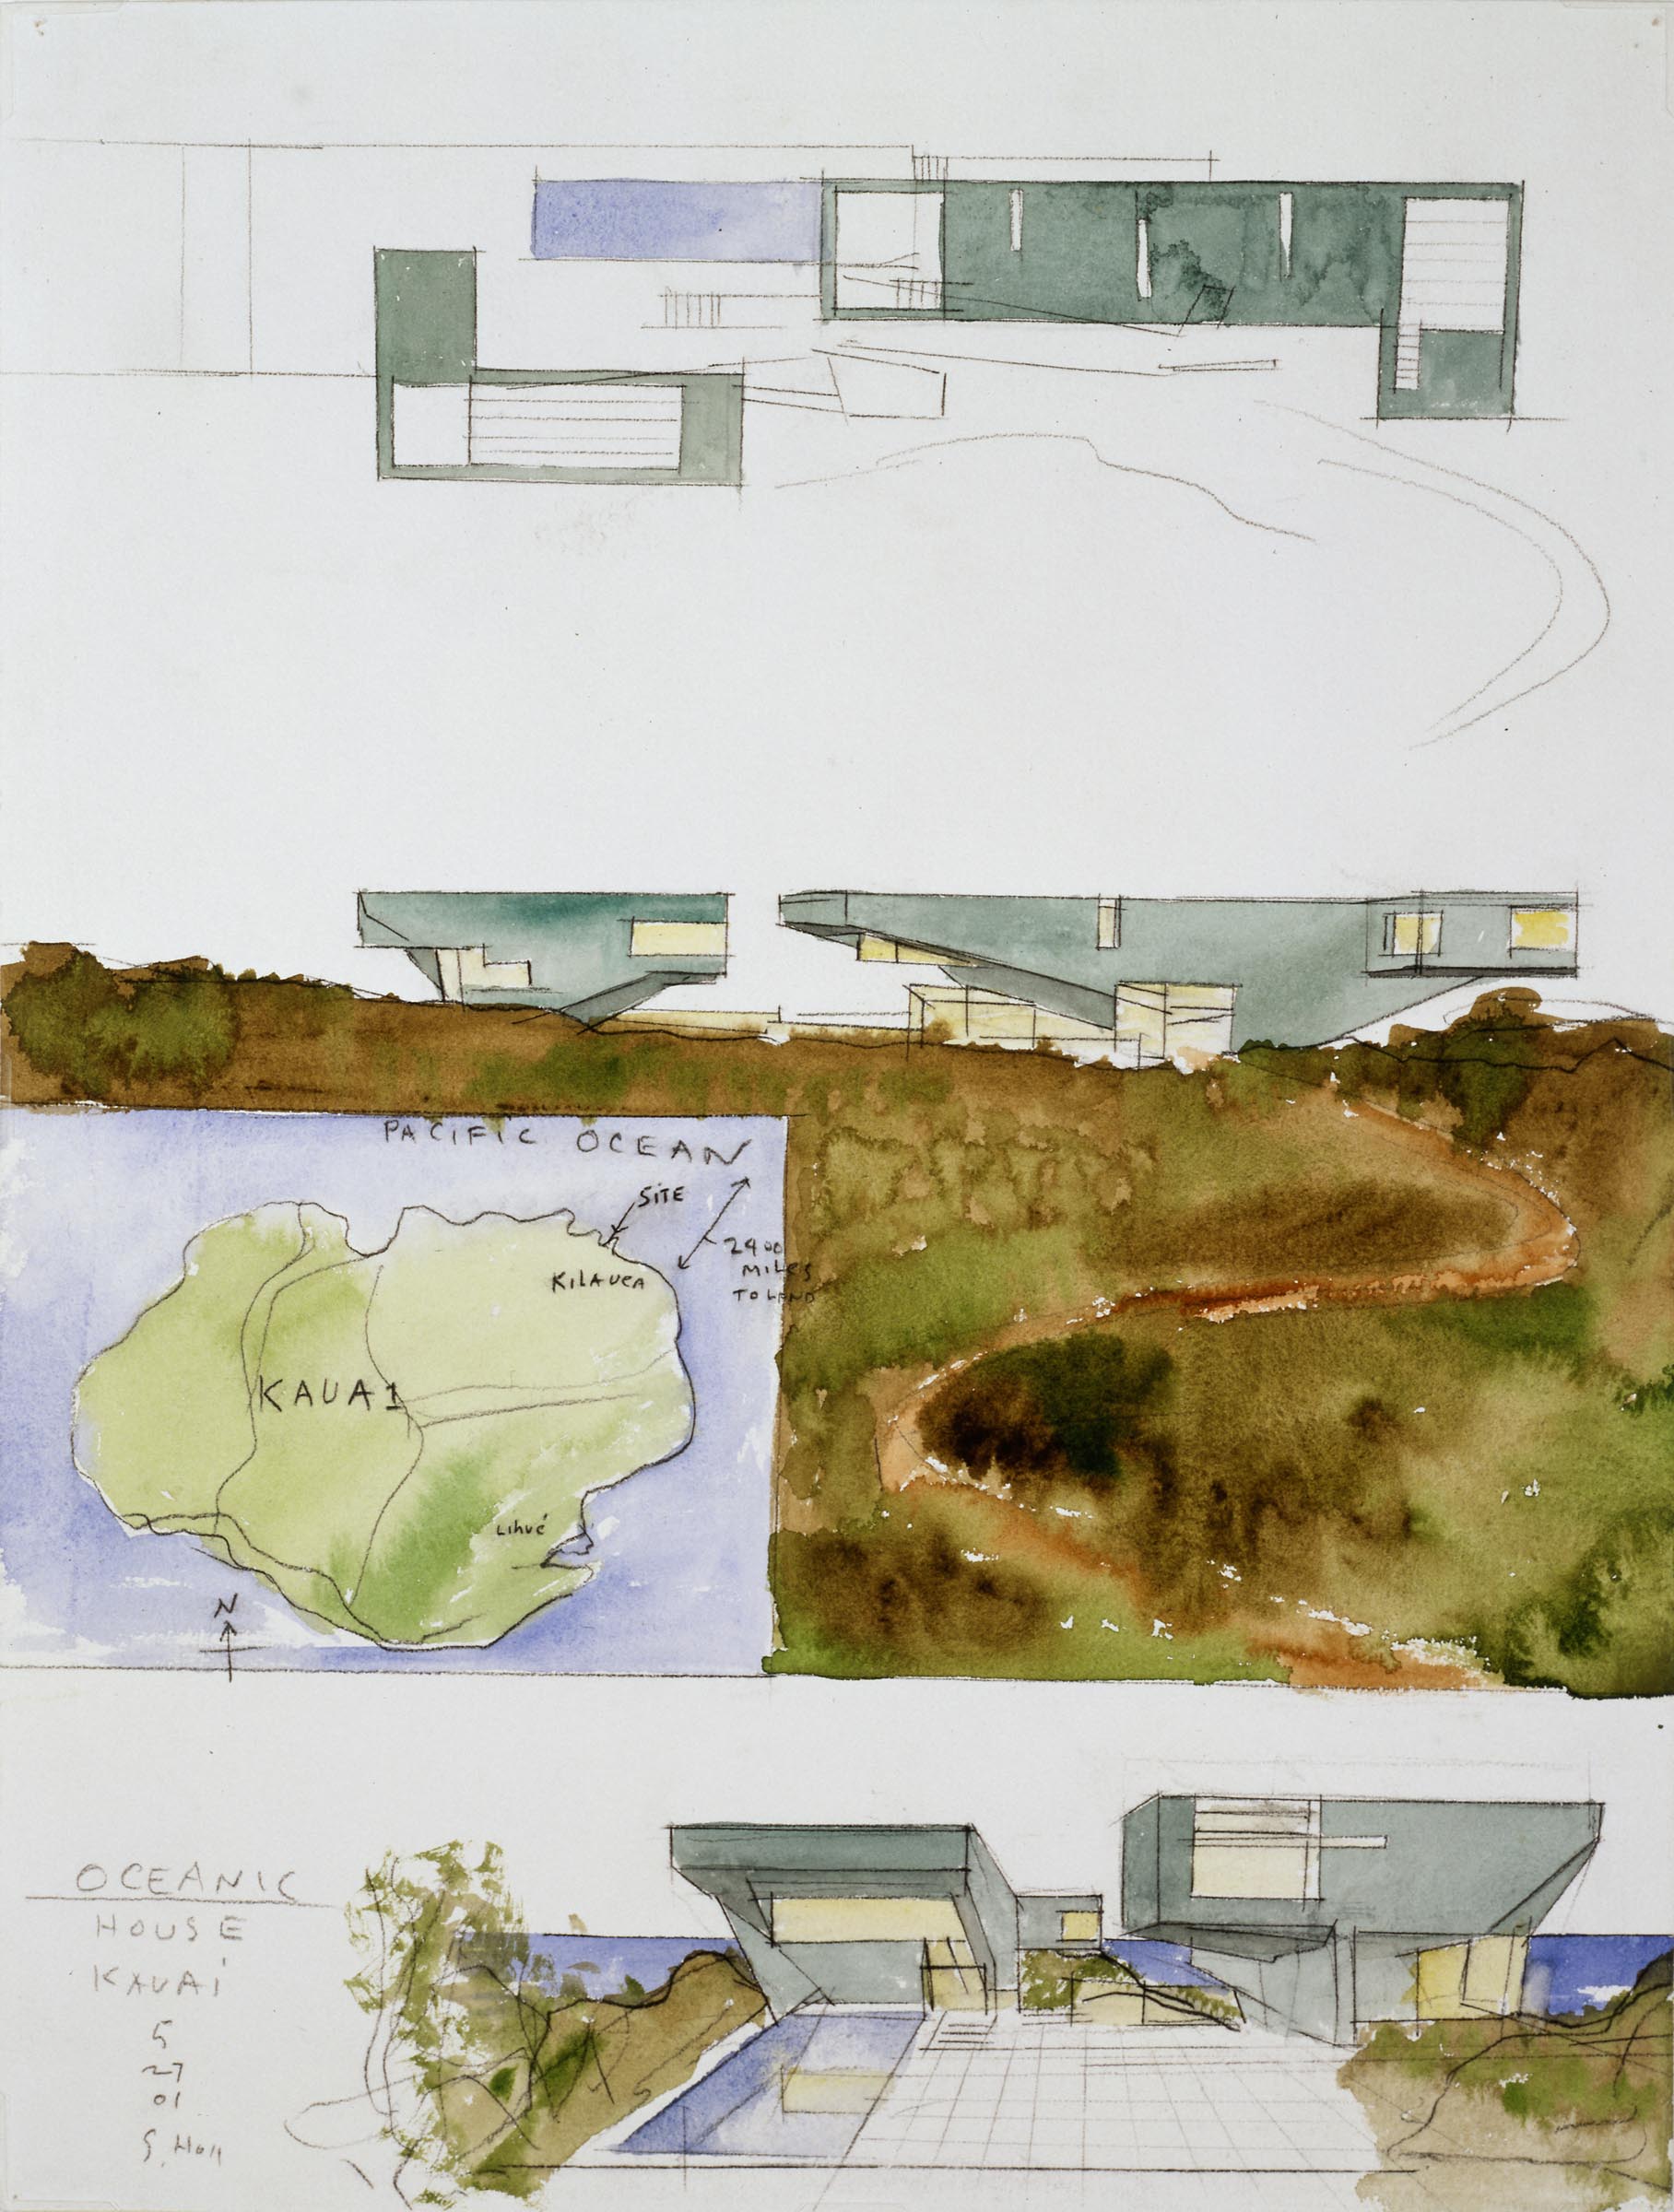 drawings of various architecture by Steven Holl. The building features various trapezoids